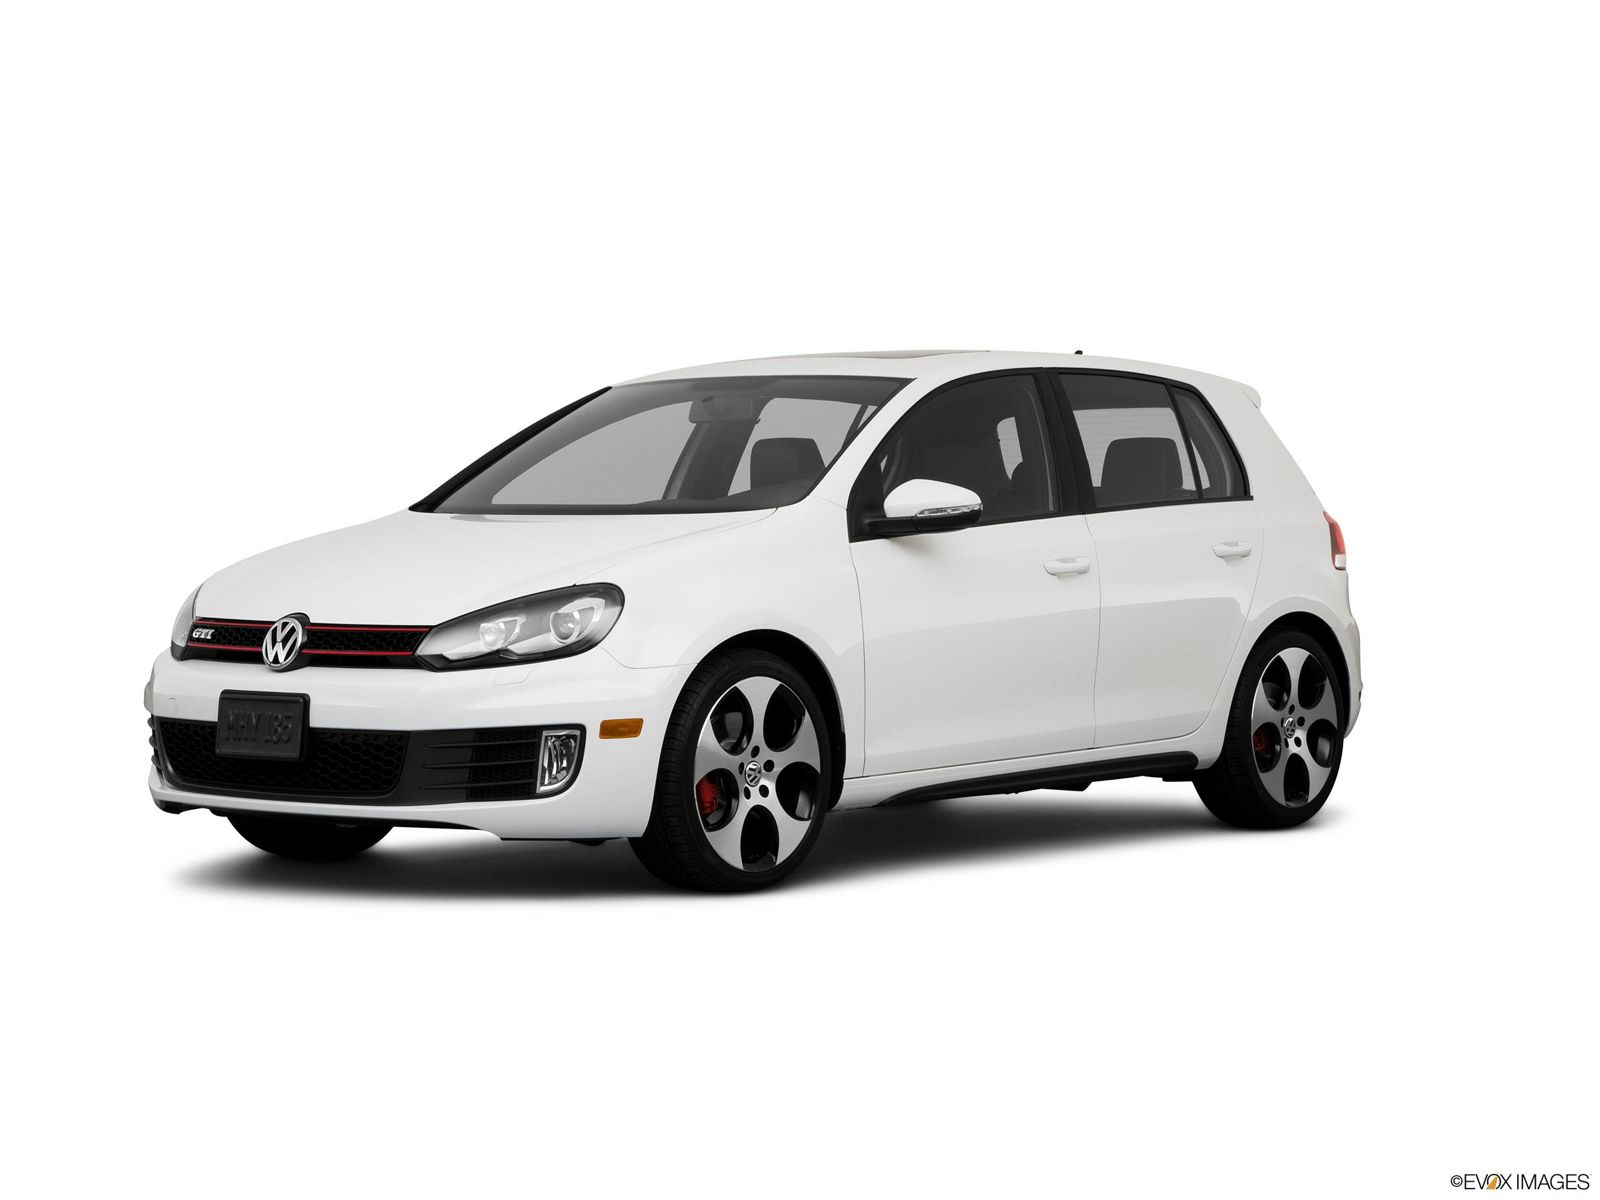 2010 Volkswagen GTI Research, Photos, Specs and Expertise | CarMax